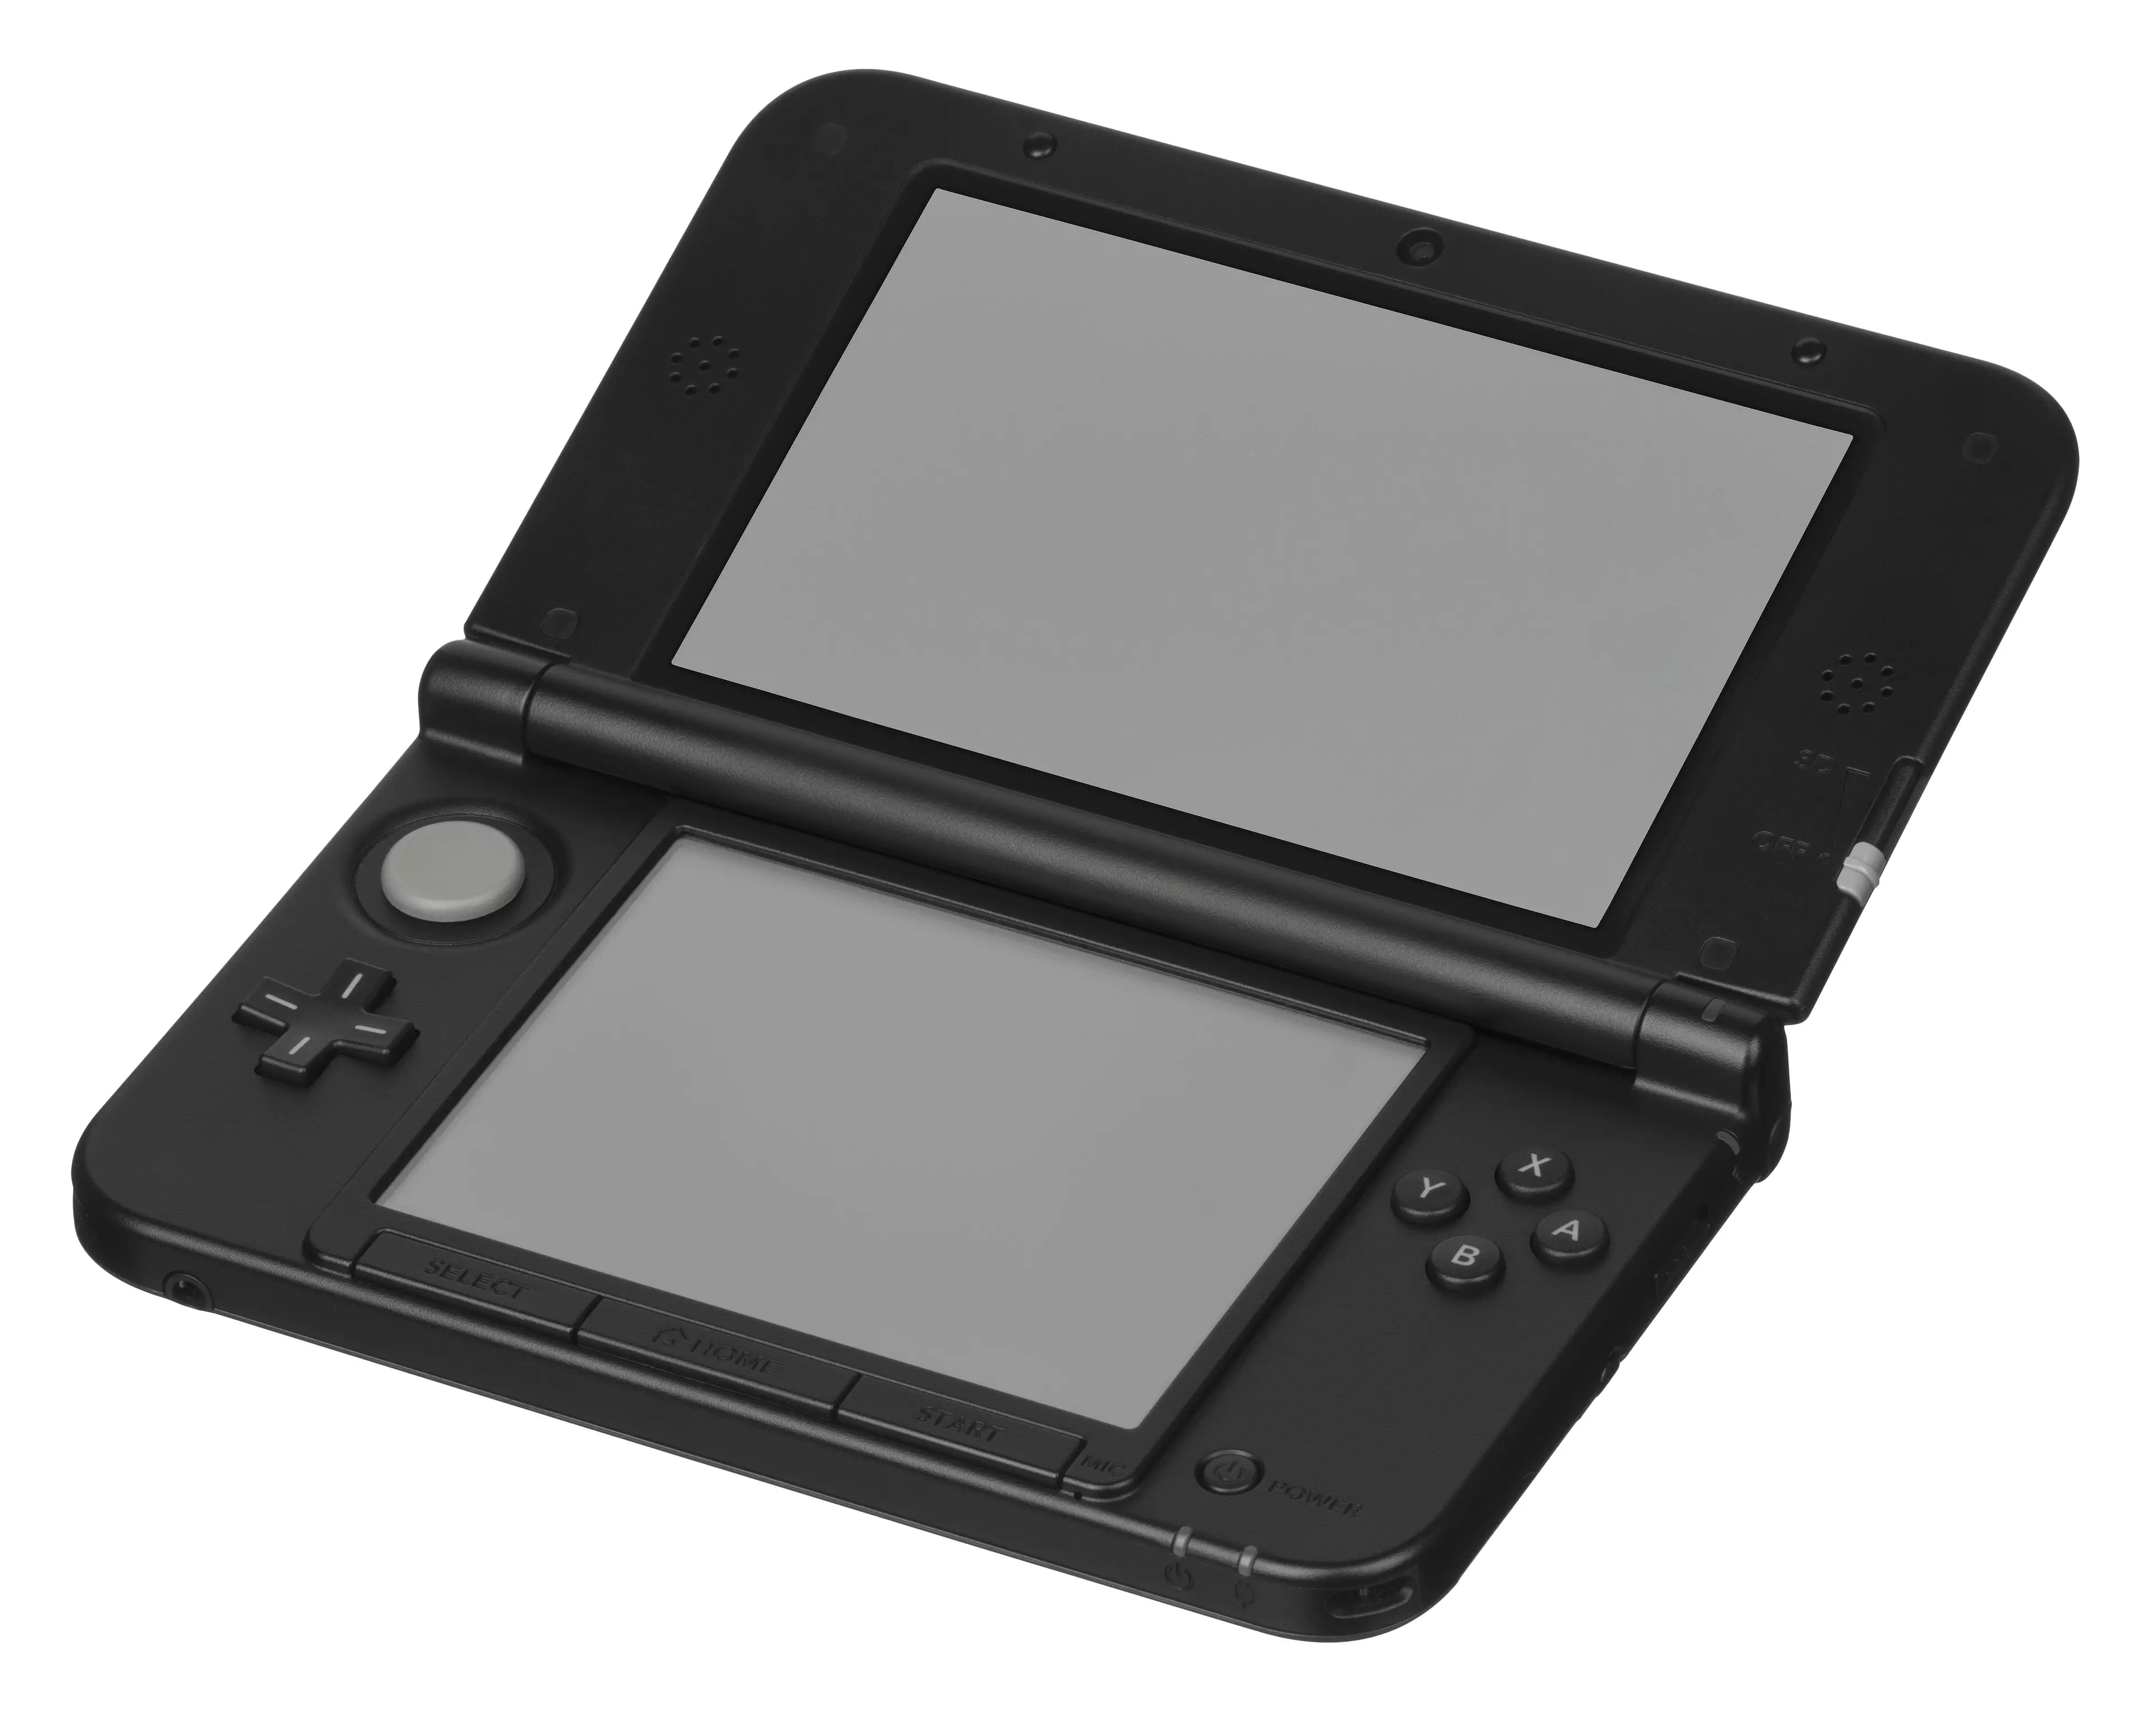 The 'XL' model of the Nintendo 3DS /